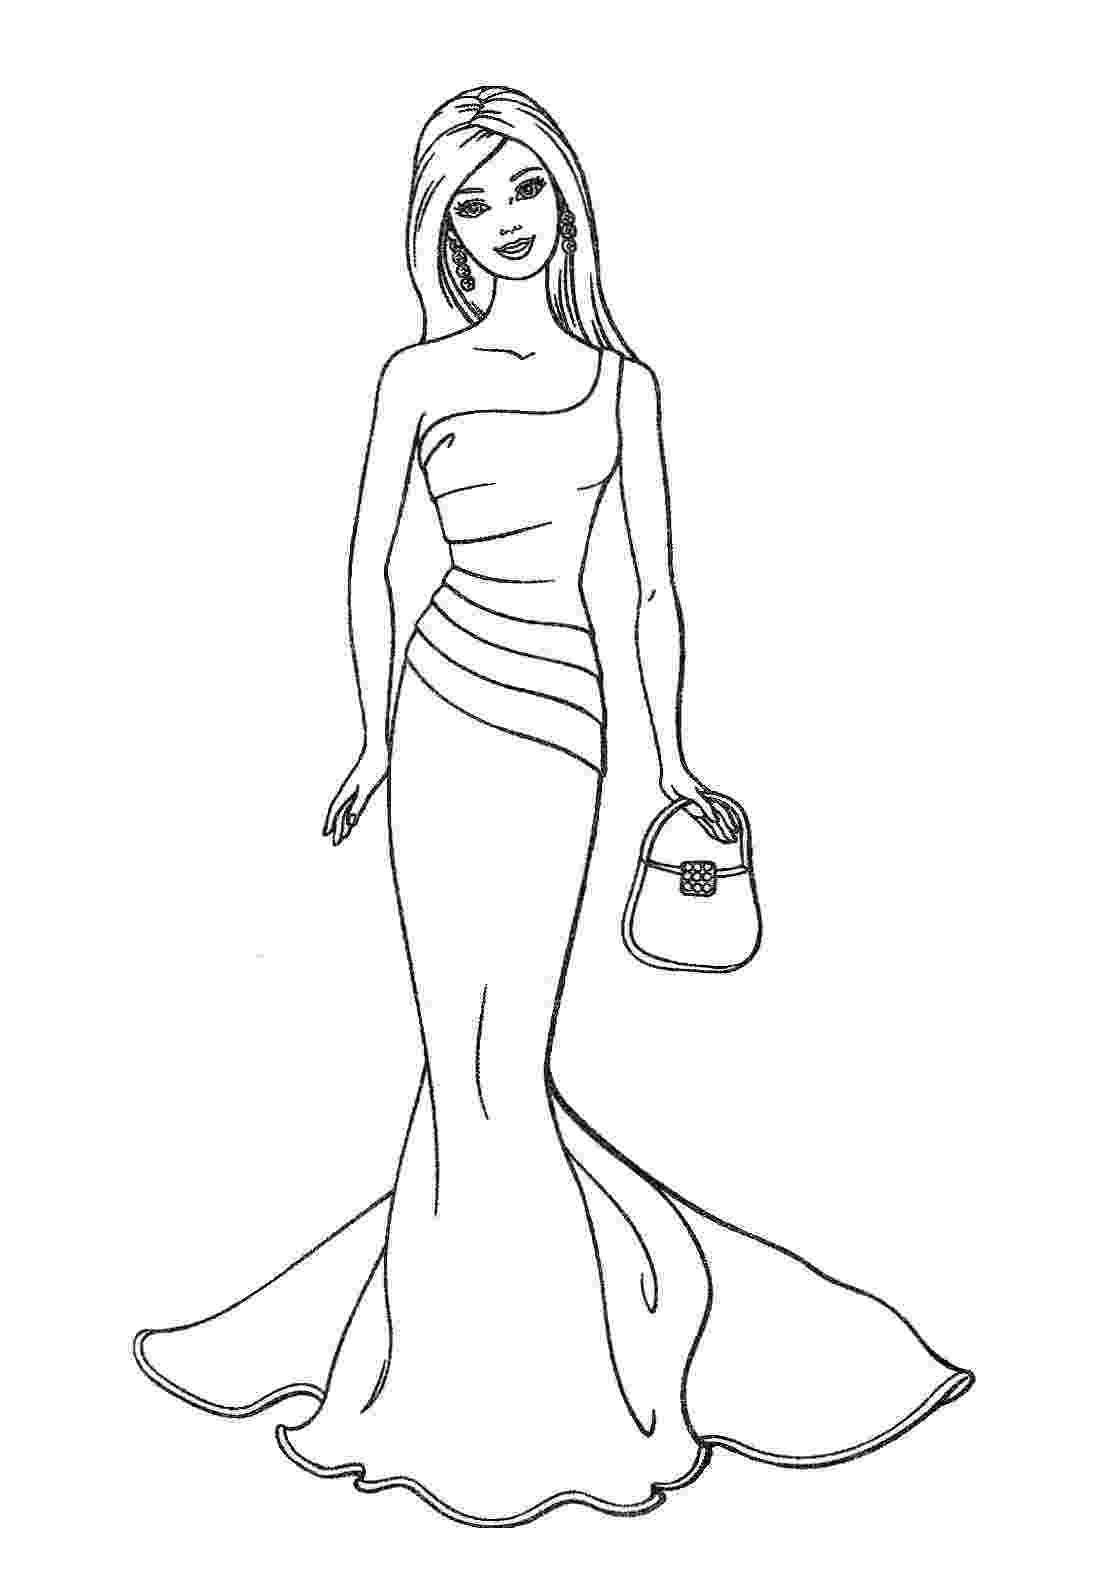 barbie print out coloring pages barbie as merliah coloring pages hellokidscom coloring barbie print pages out 